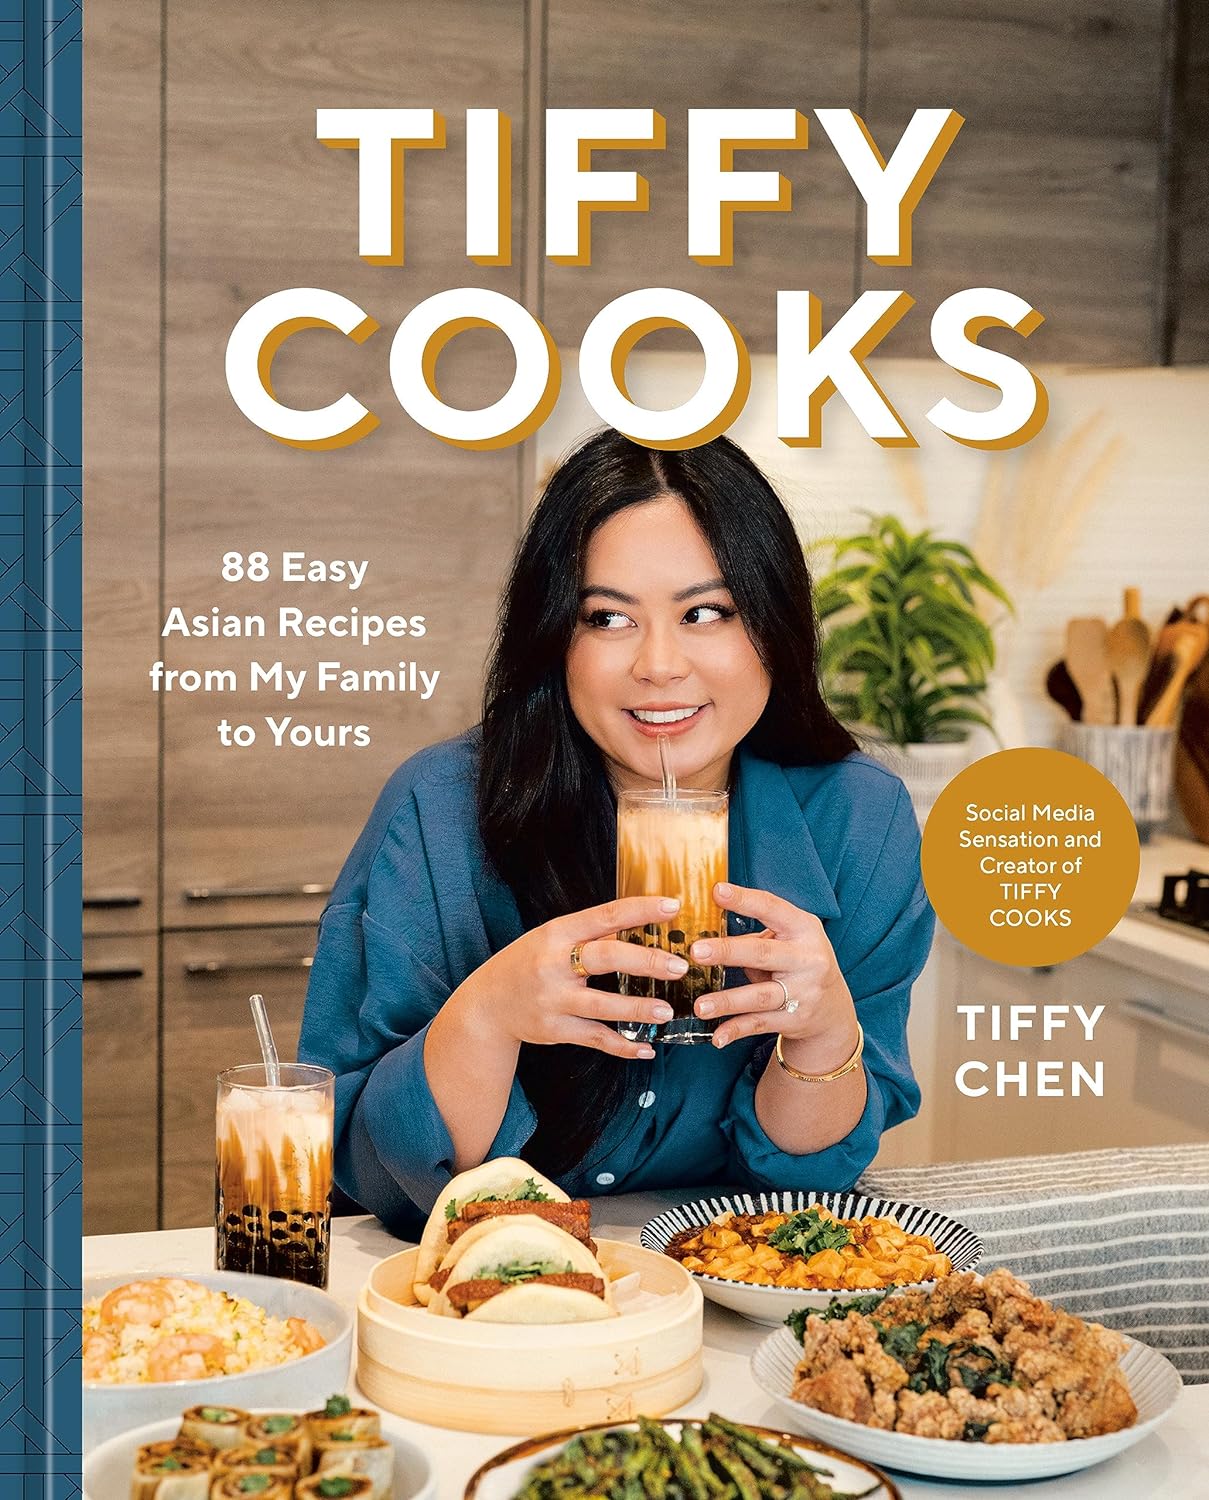 Tiffy Cooks: 88 Easy Asian Recipes from My Family to Yours (Tiffy Chen)